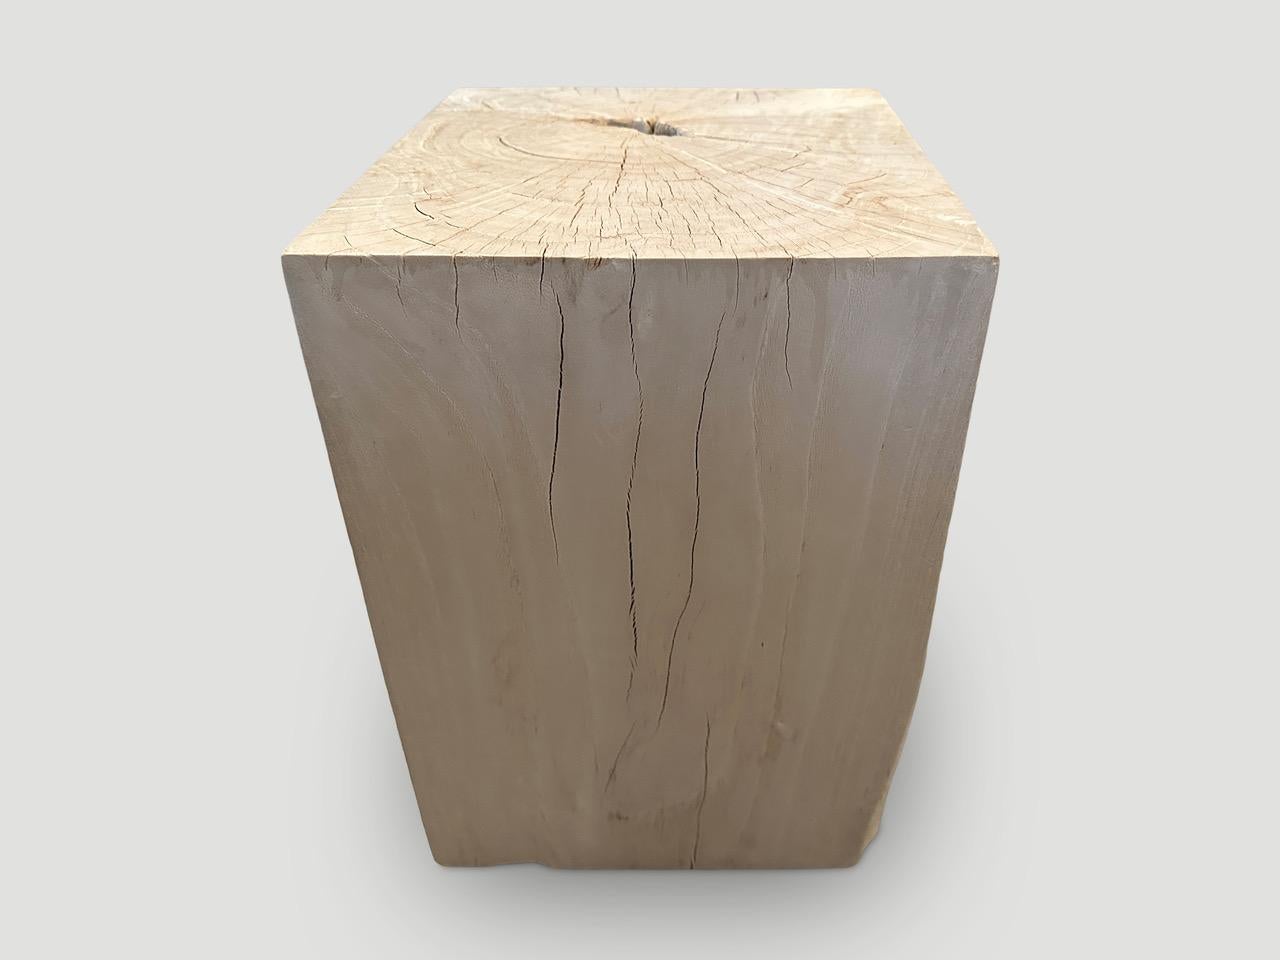 Reclaimed teak wood side table, hand carved whilst respecting the natural organic wood. Bleached to a bone finish. 

The St. Barts Collection features an exciting line of organic white wash, bleached and natural weathered teak furniture. The